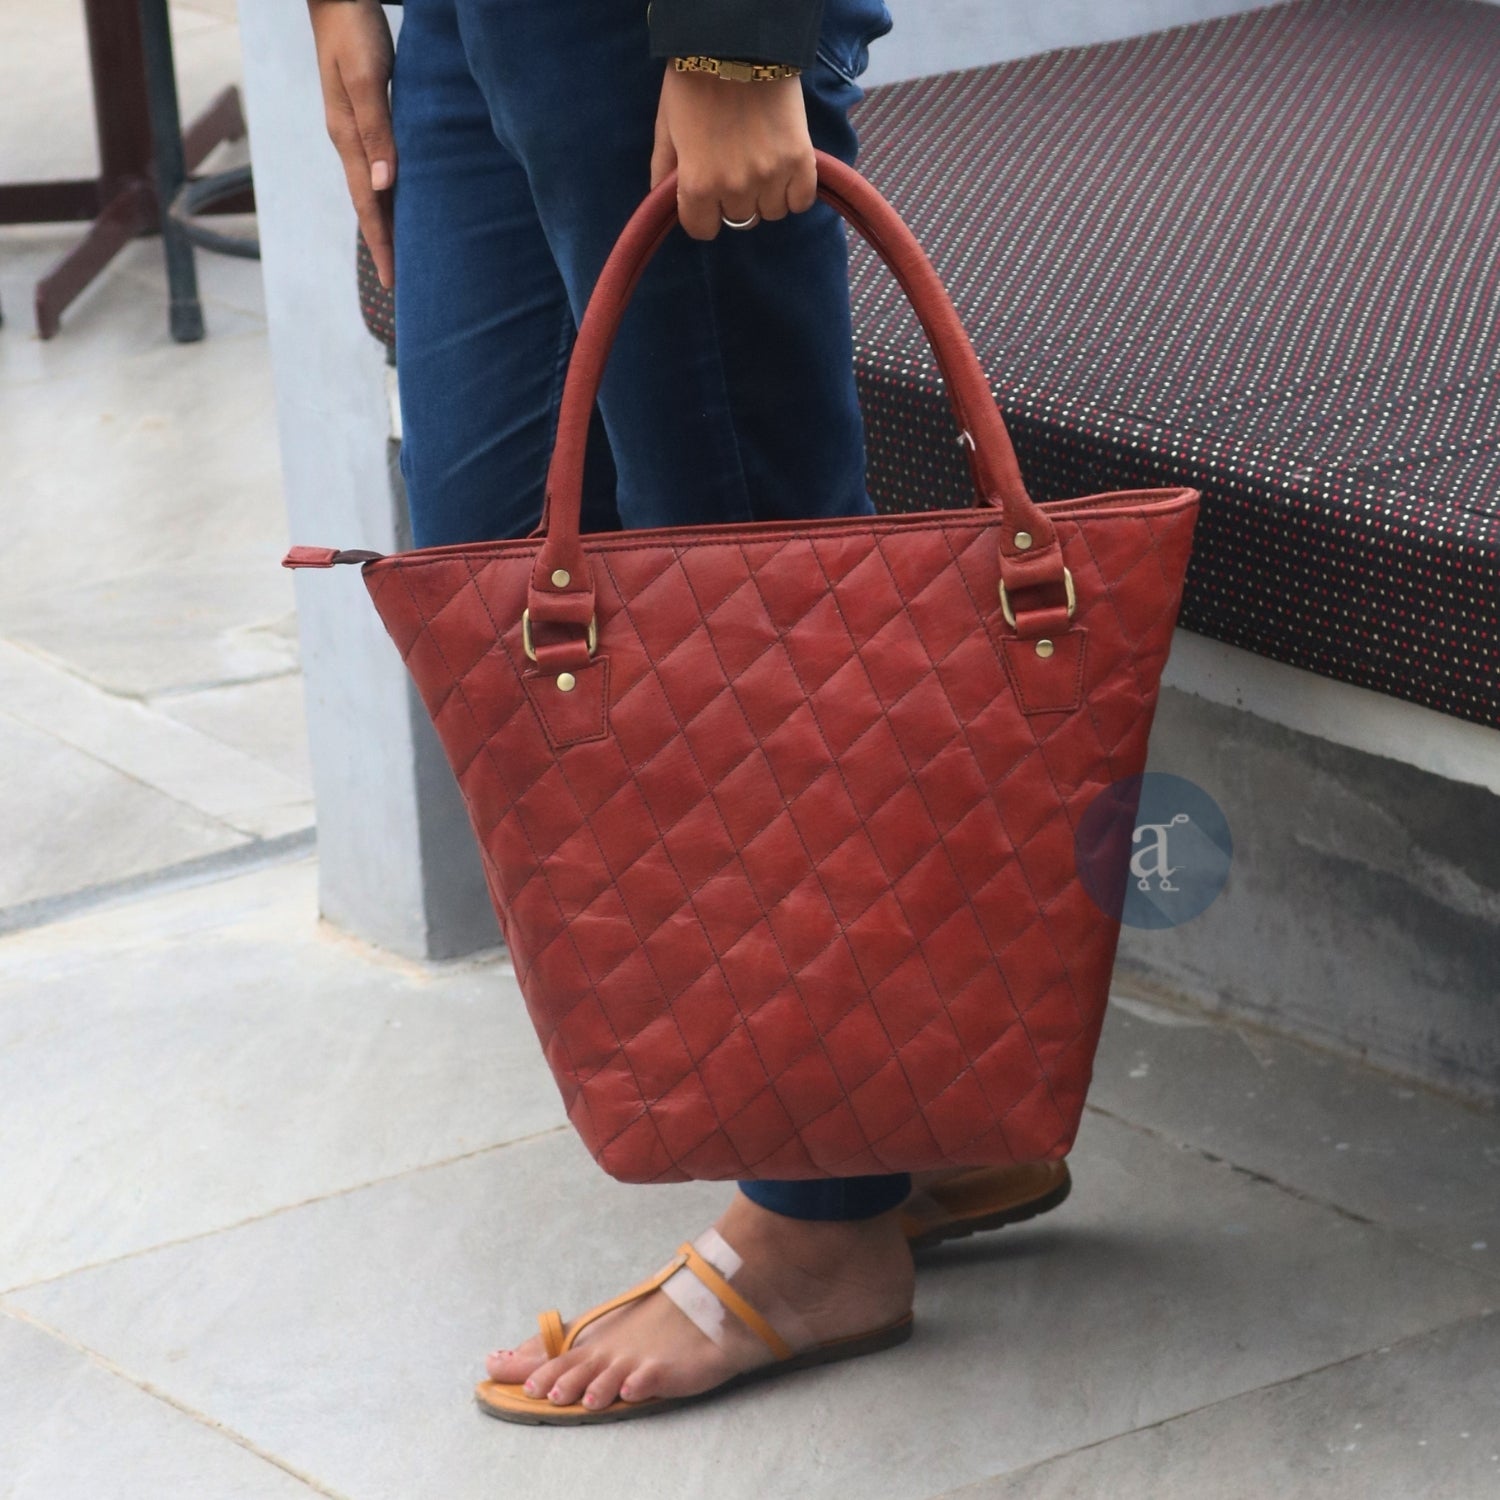 women carrying leather tote for work with top handles